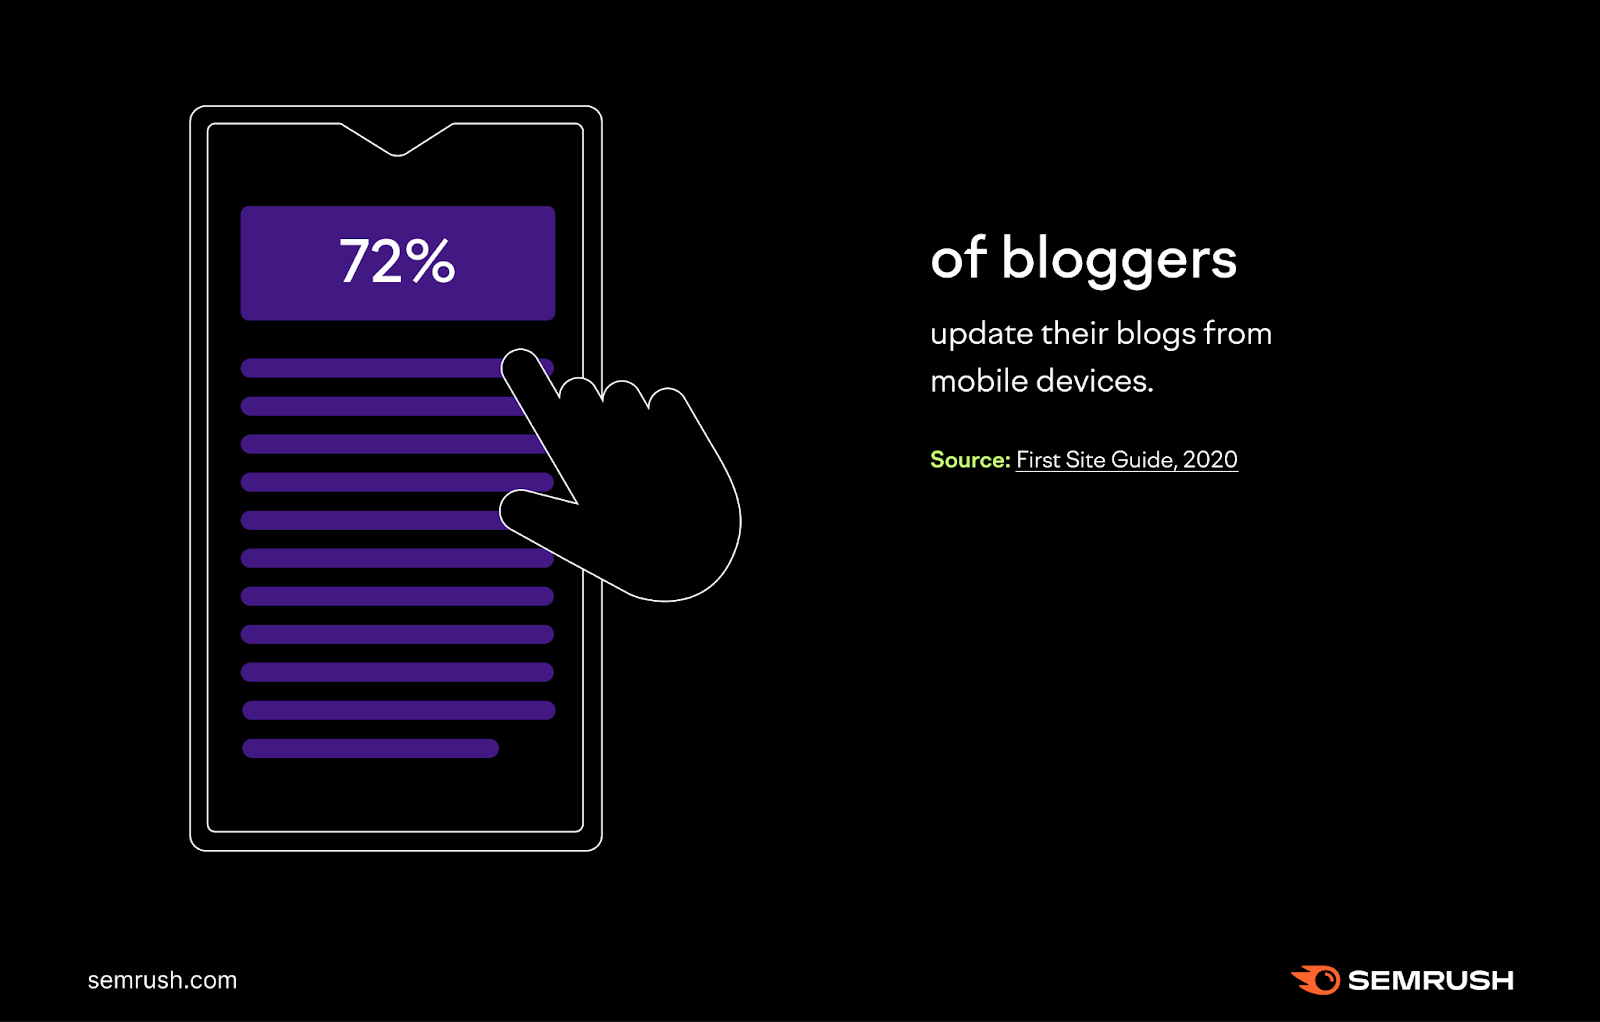 72% of bloggers update their blogs on mobile devices.